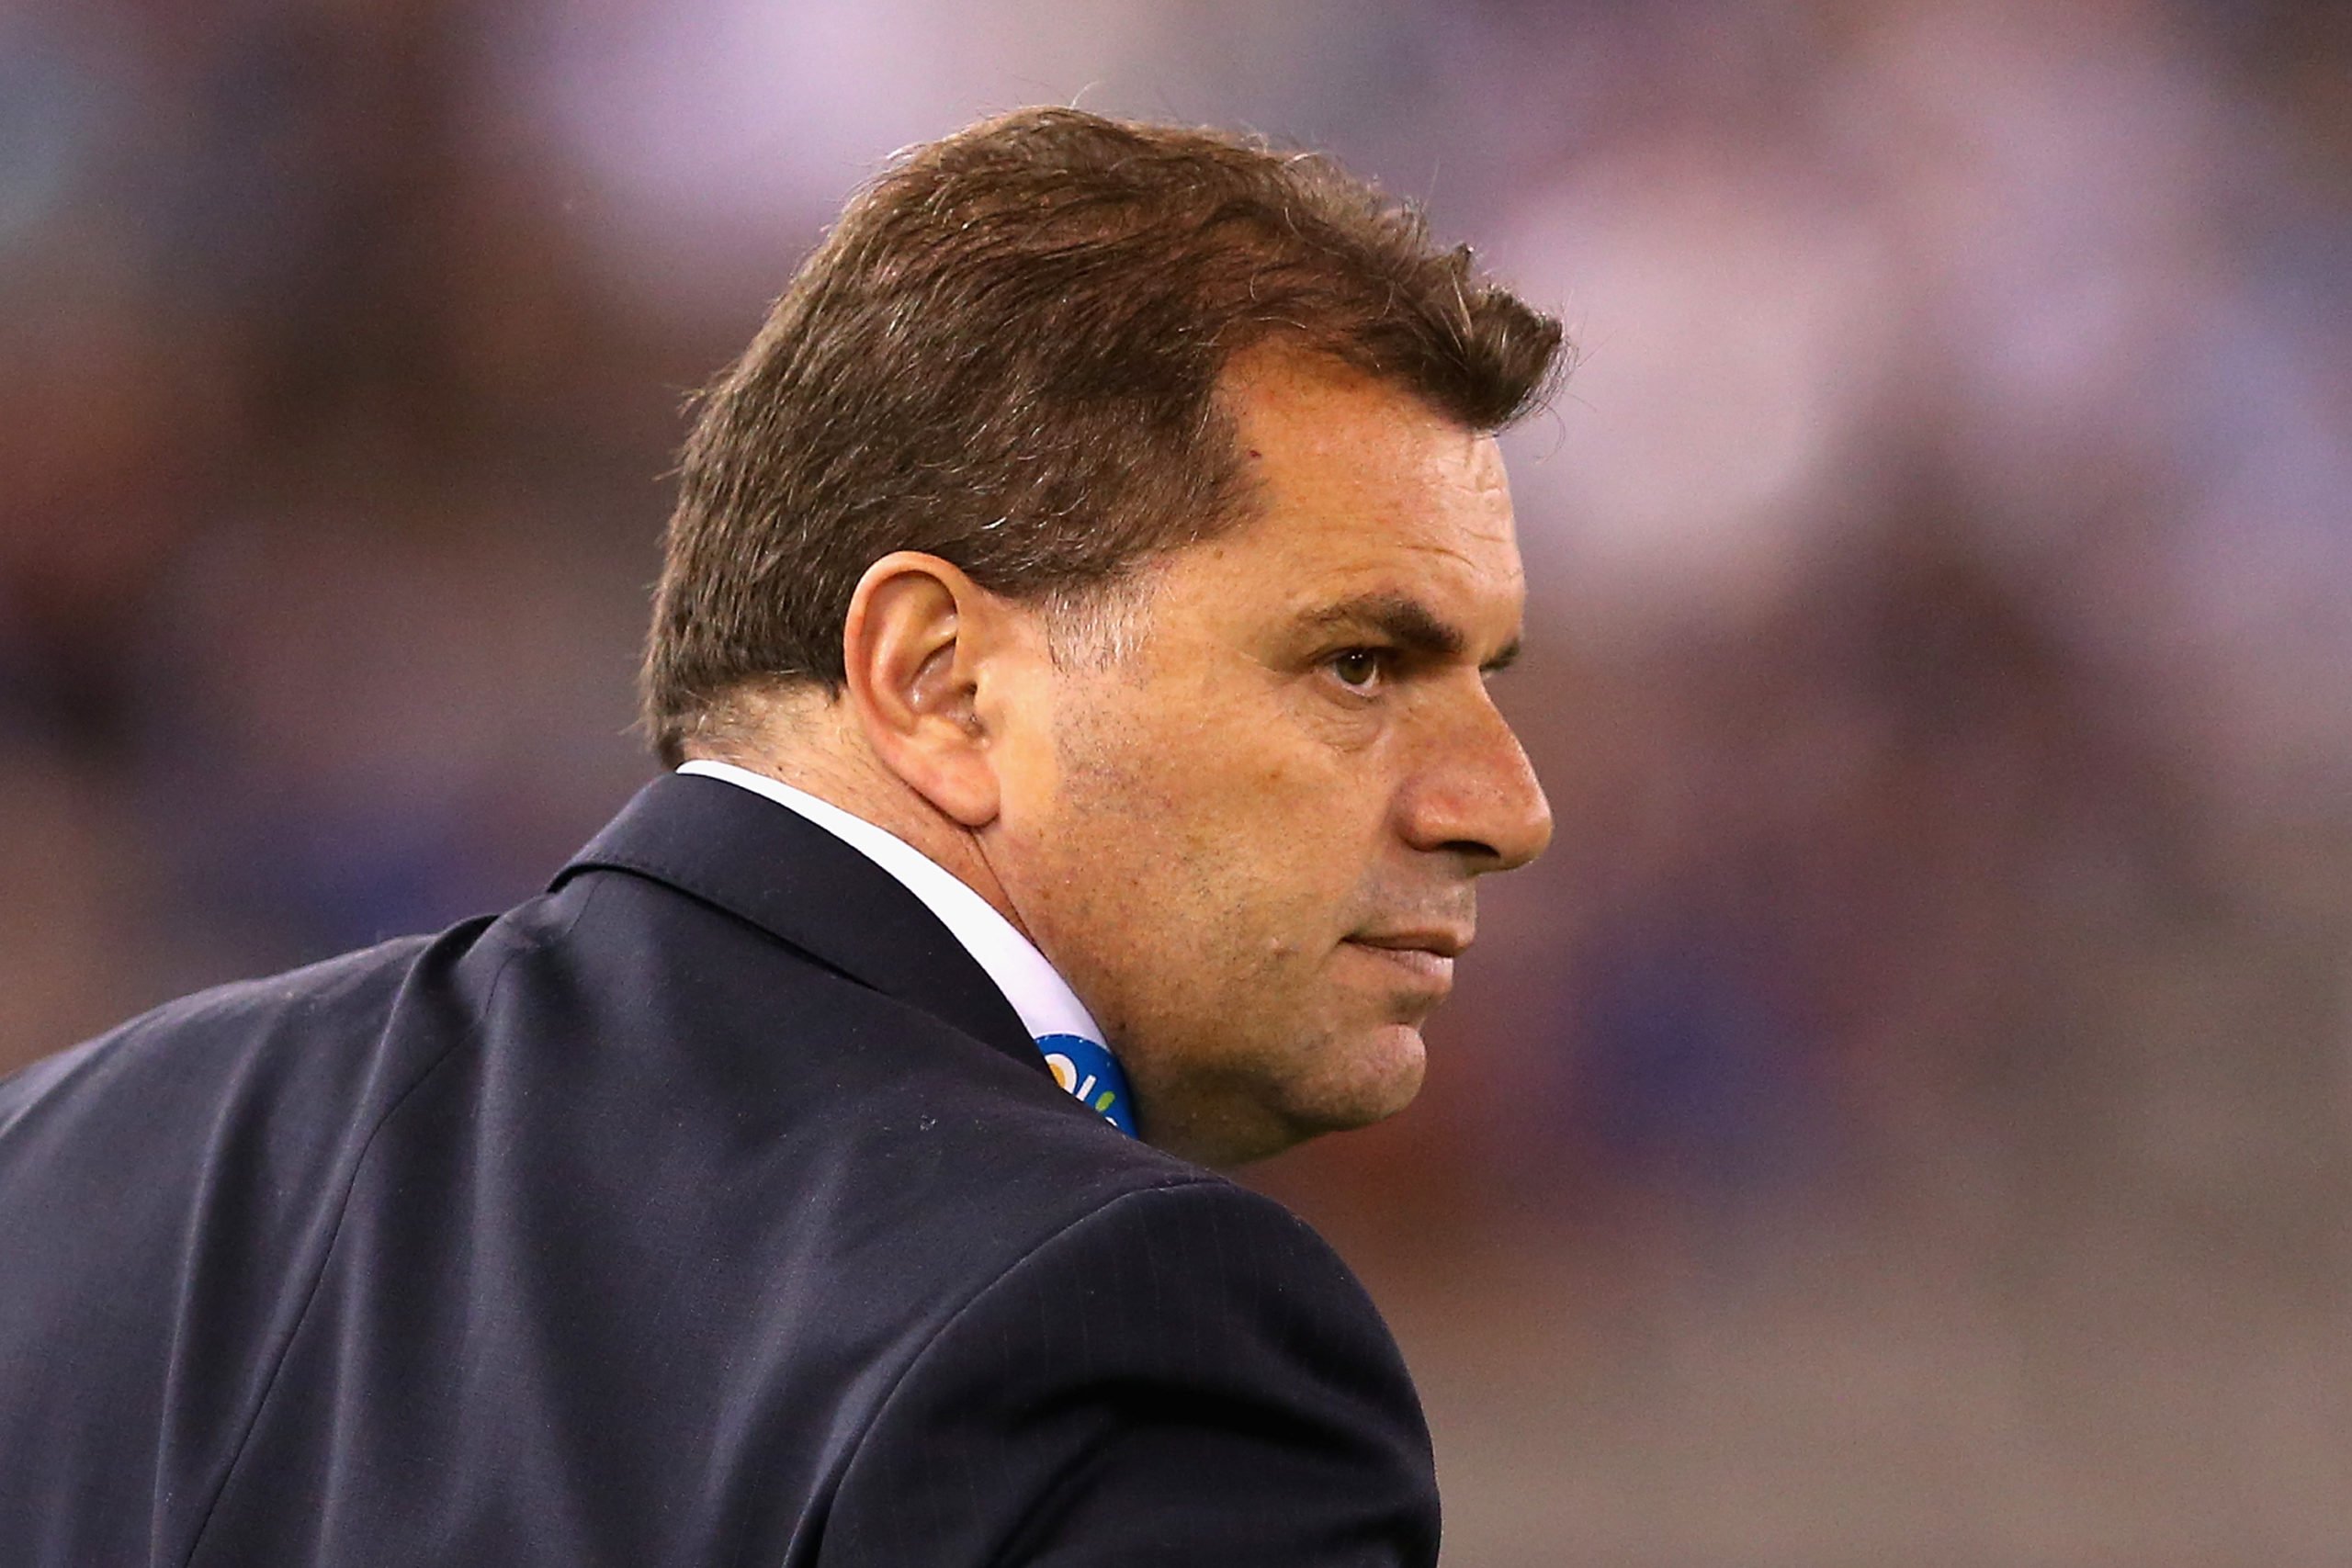 The Australian reaction to Postecoglou Celtic chat has been vastly different to the Scottish one